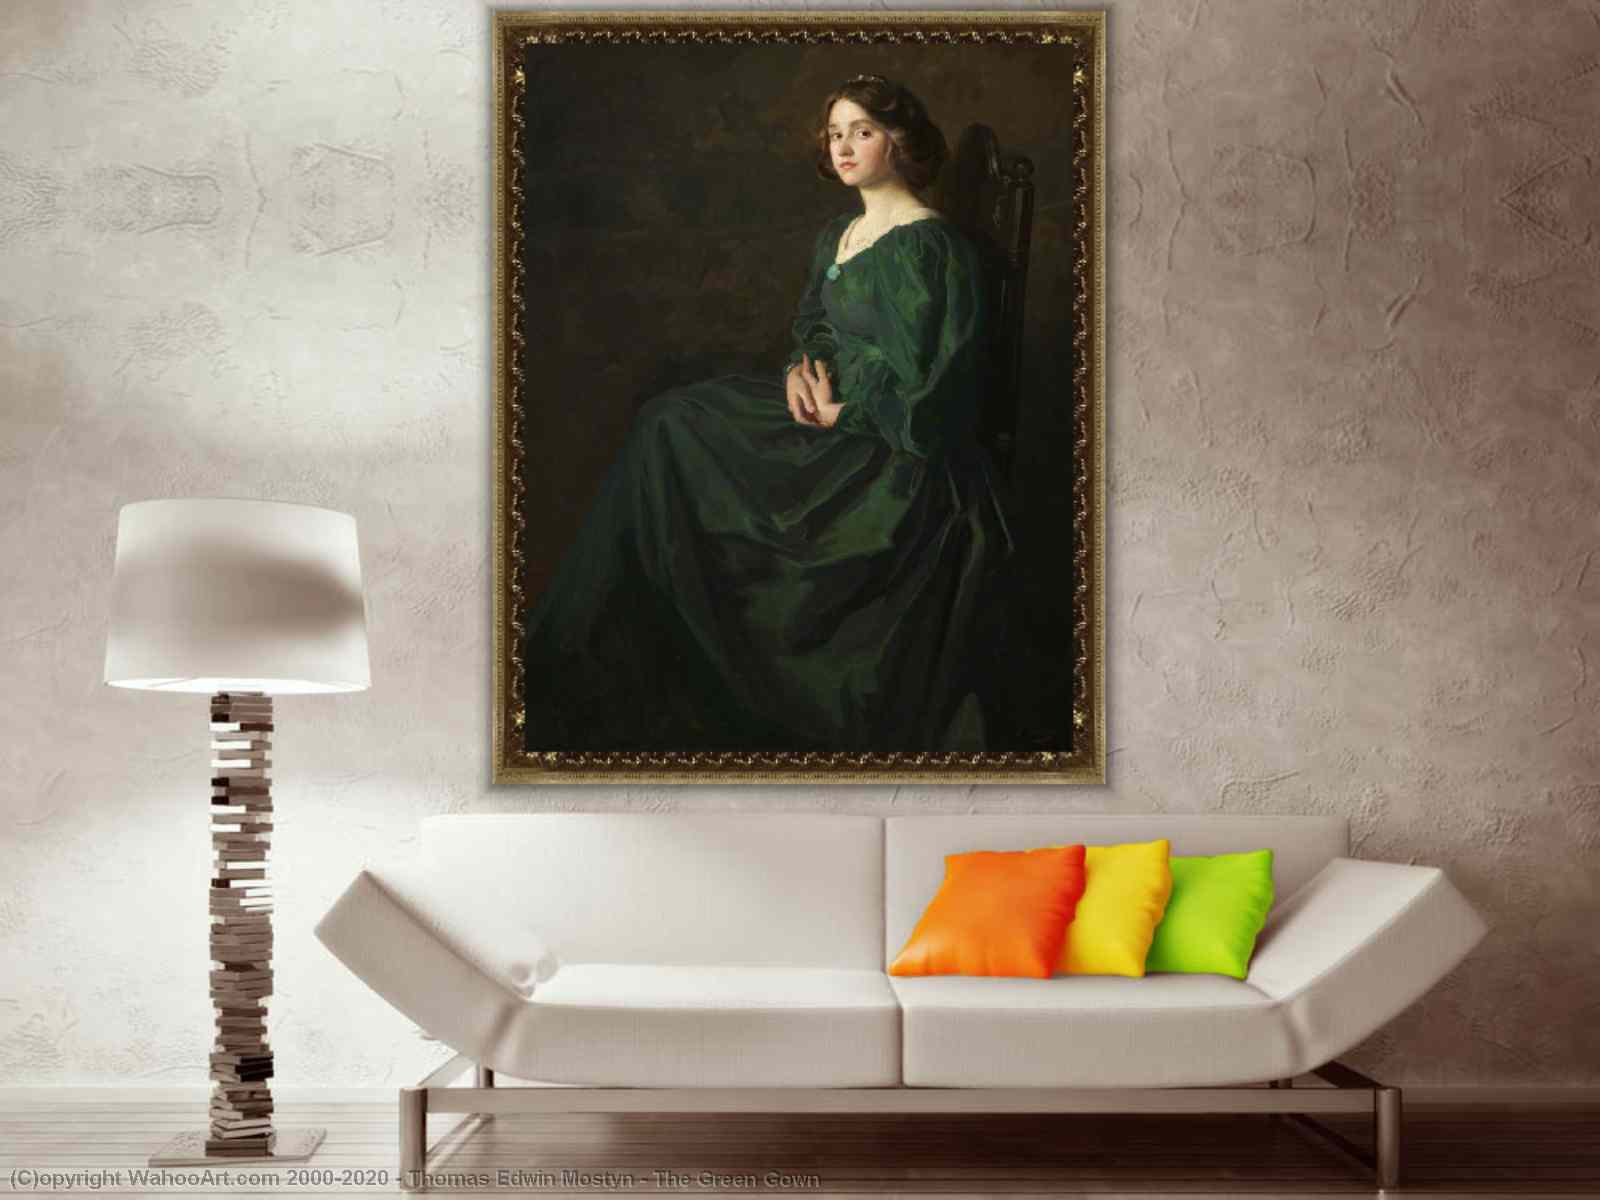 Gallery Oldham - Liverpool-born Thomas Mostyn was known to paint family  members. In 1919 he painted 'The Green Gown', which features his daughter  Marjory. Mostyn grew up in Manchester and later moved